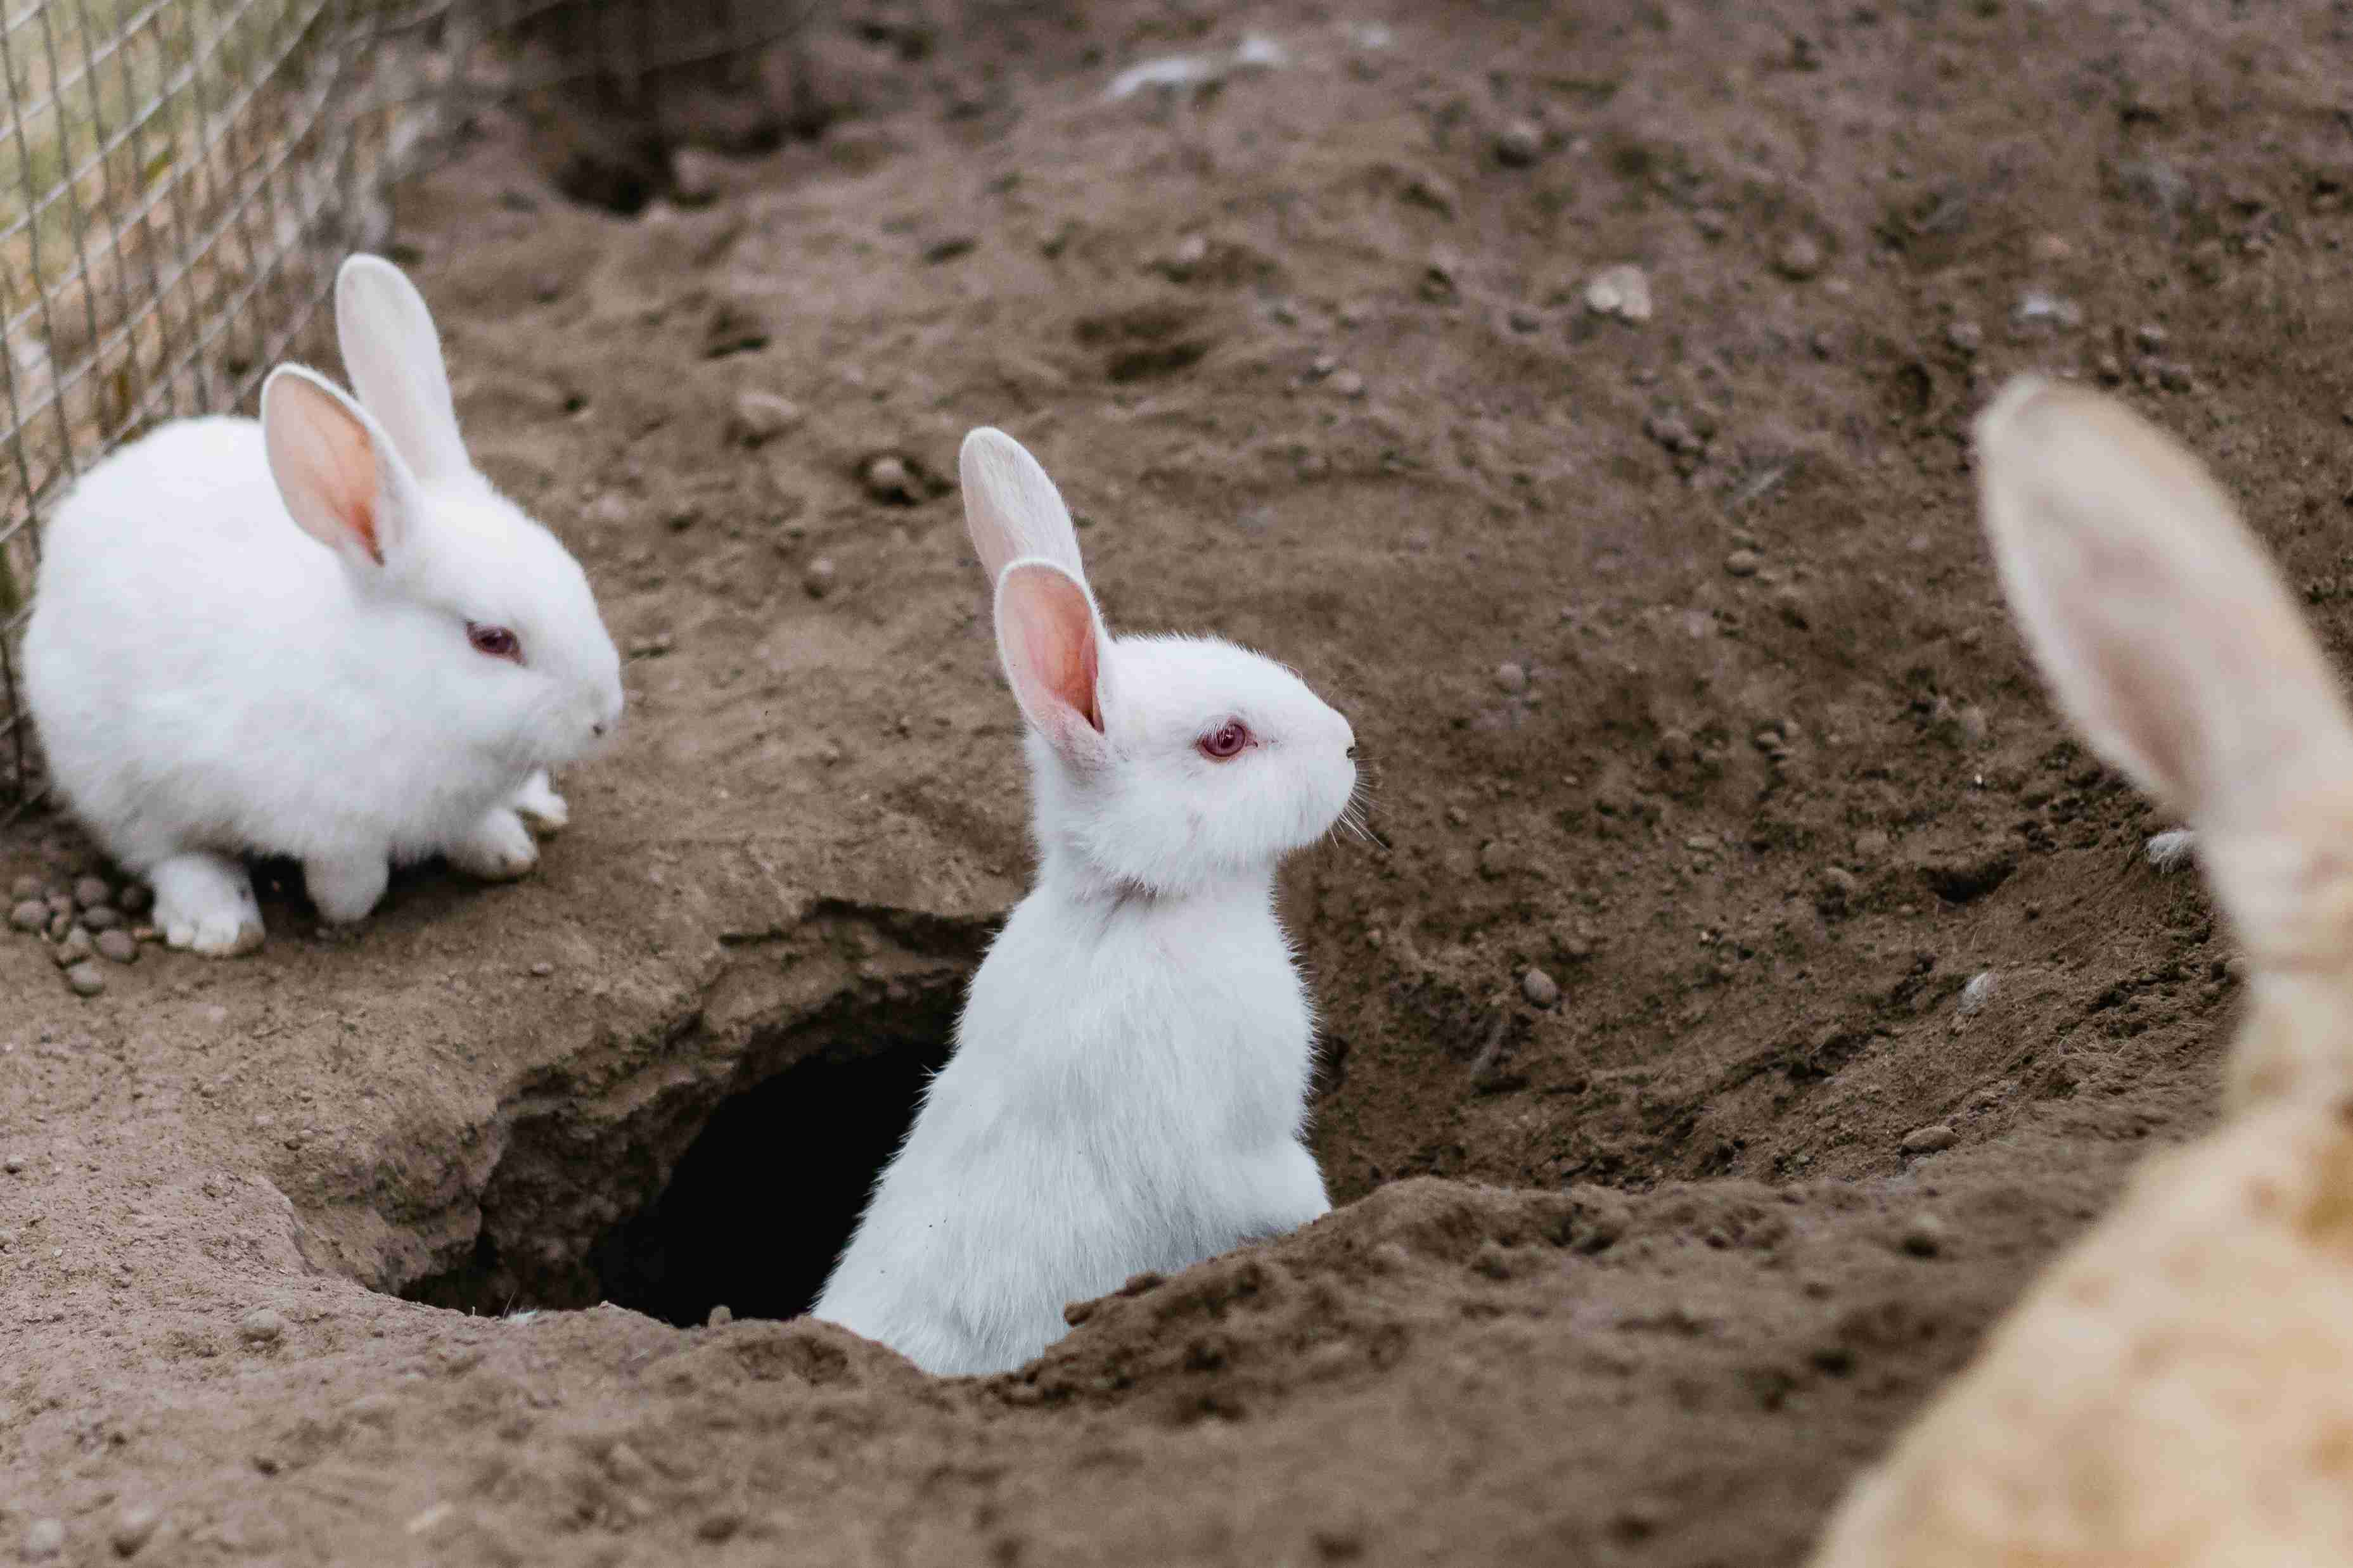 Debunking The Myths: 5 Common Misconceptions About Rabbits You Need To Know